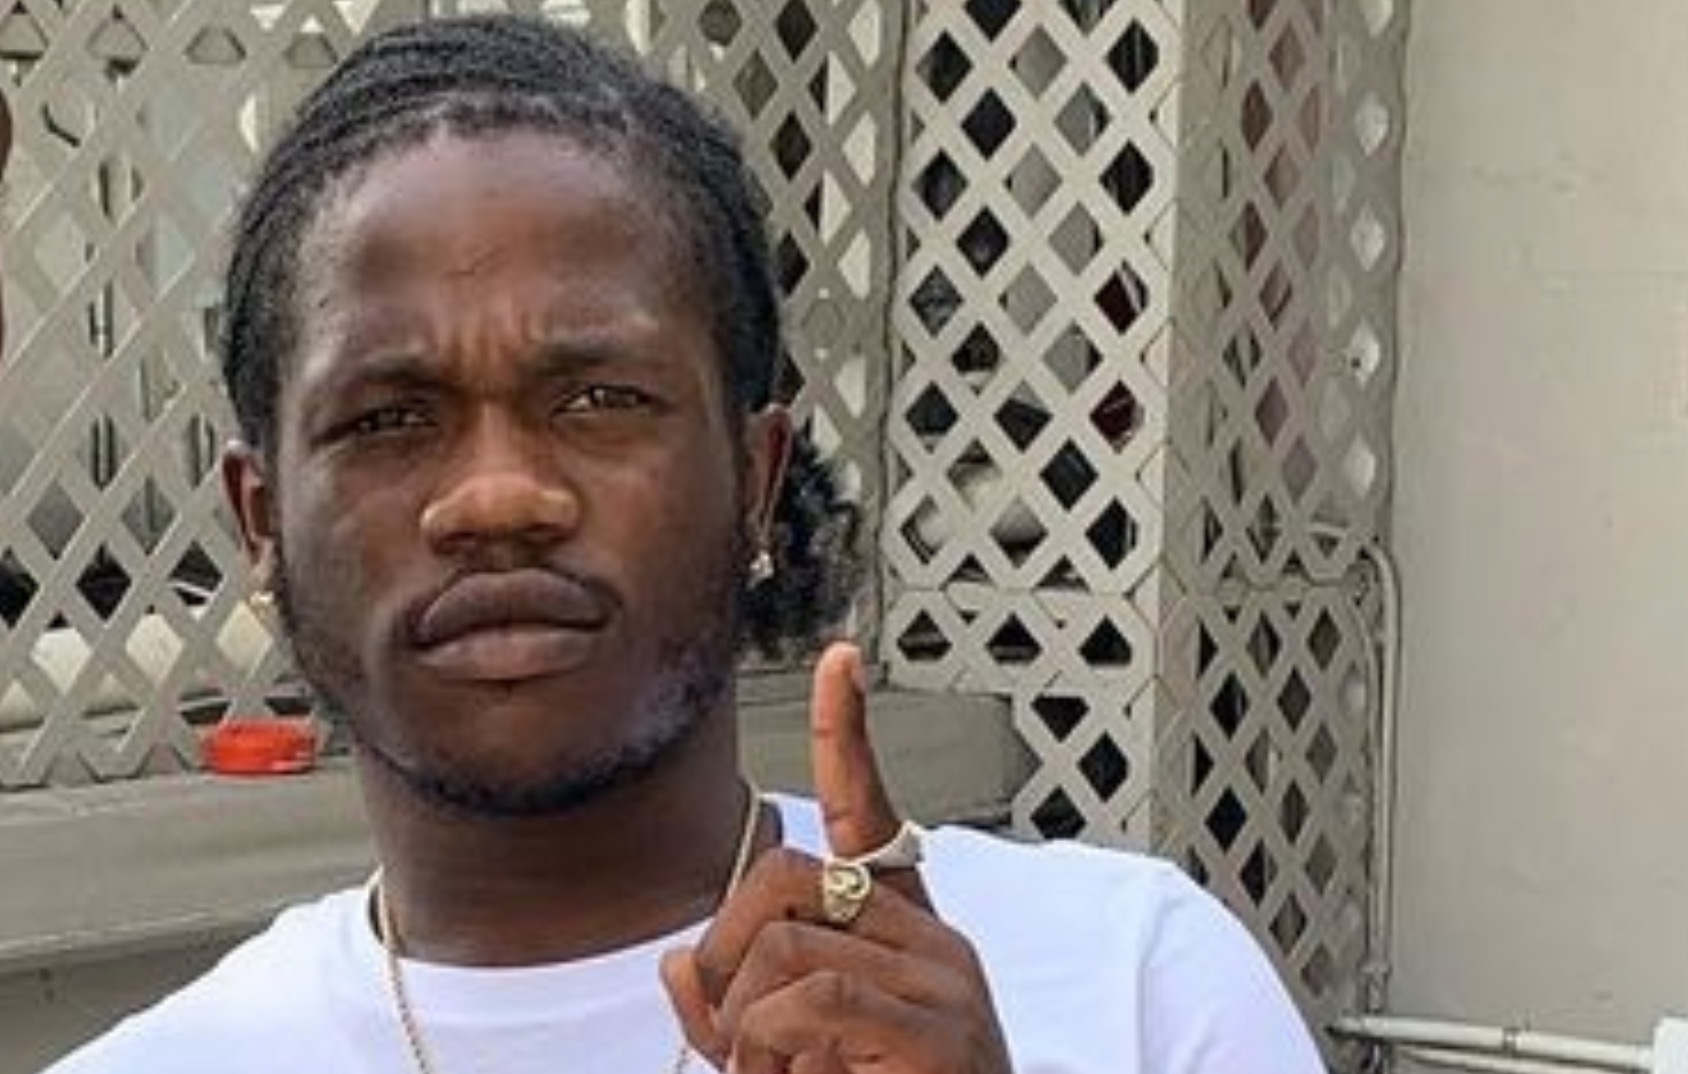 Jahshii Released After Questioning by Constant Spring Police – YARDHYPE